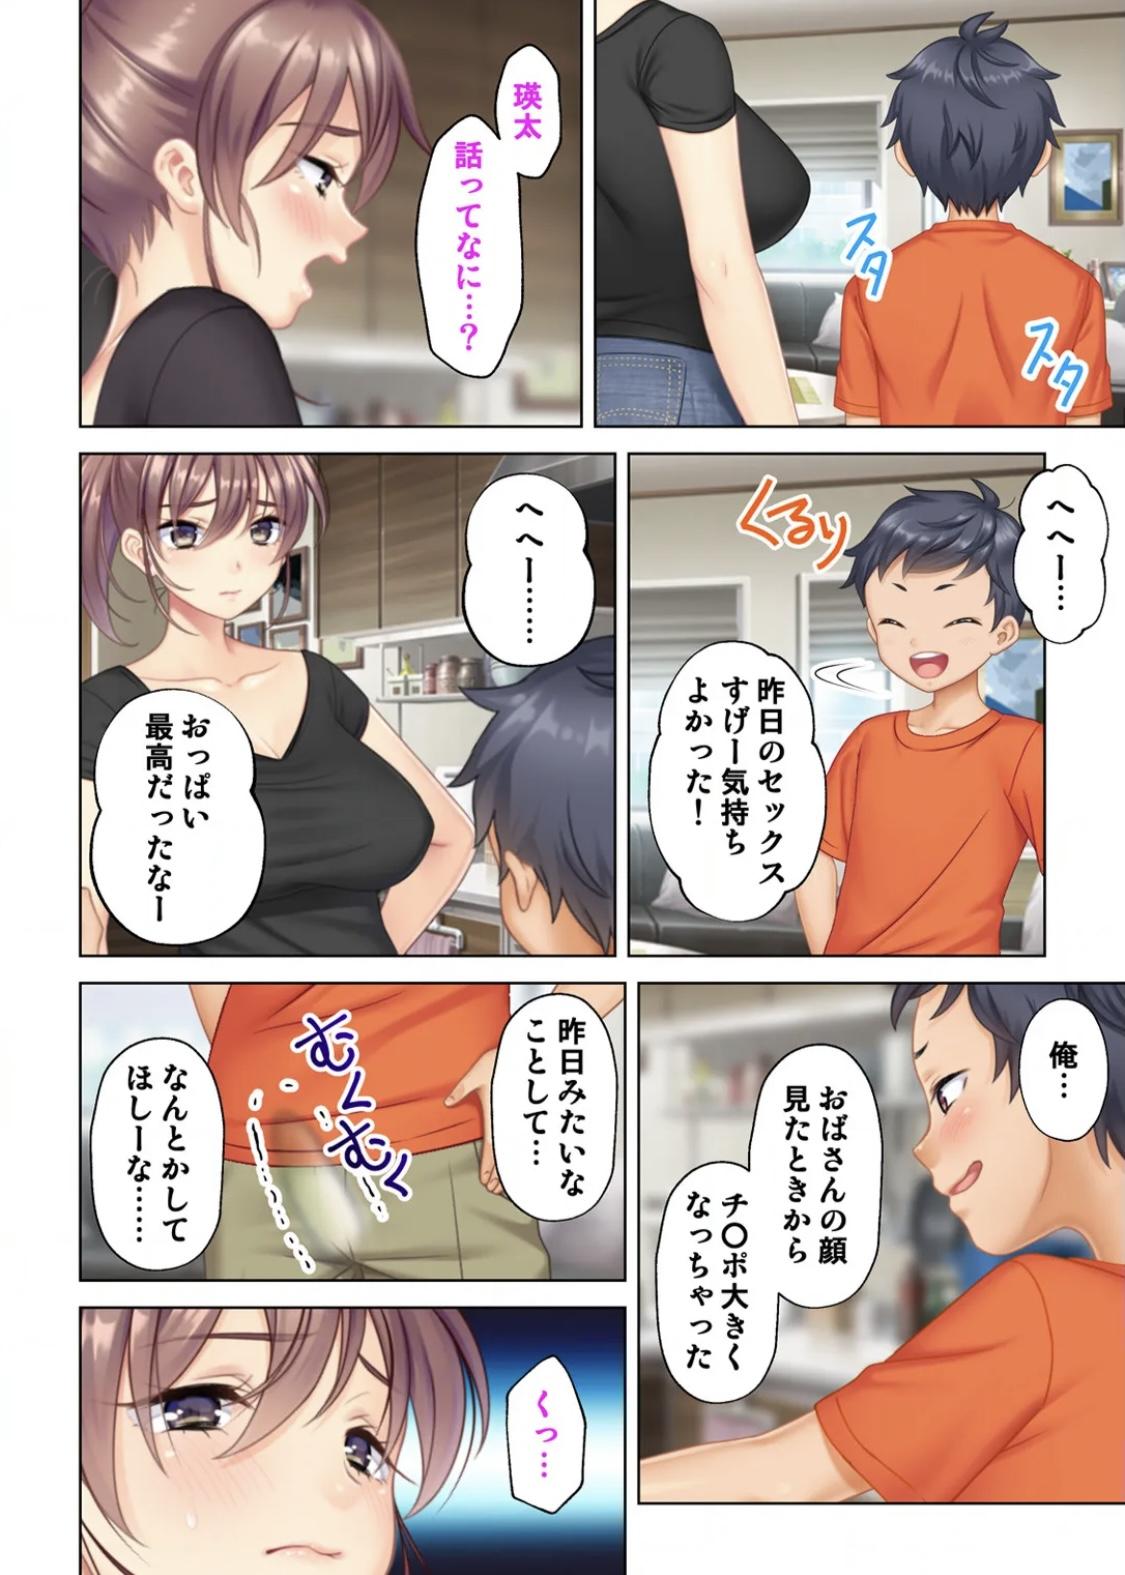 Mamada I was reincarnated as the son of a beautiful mom so I pretended to be spoiled, played with her boobs and with an innocent smile tried to insert my stick in my childhood friend mom Gay Party - Page 7